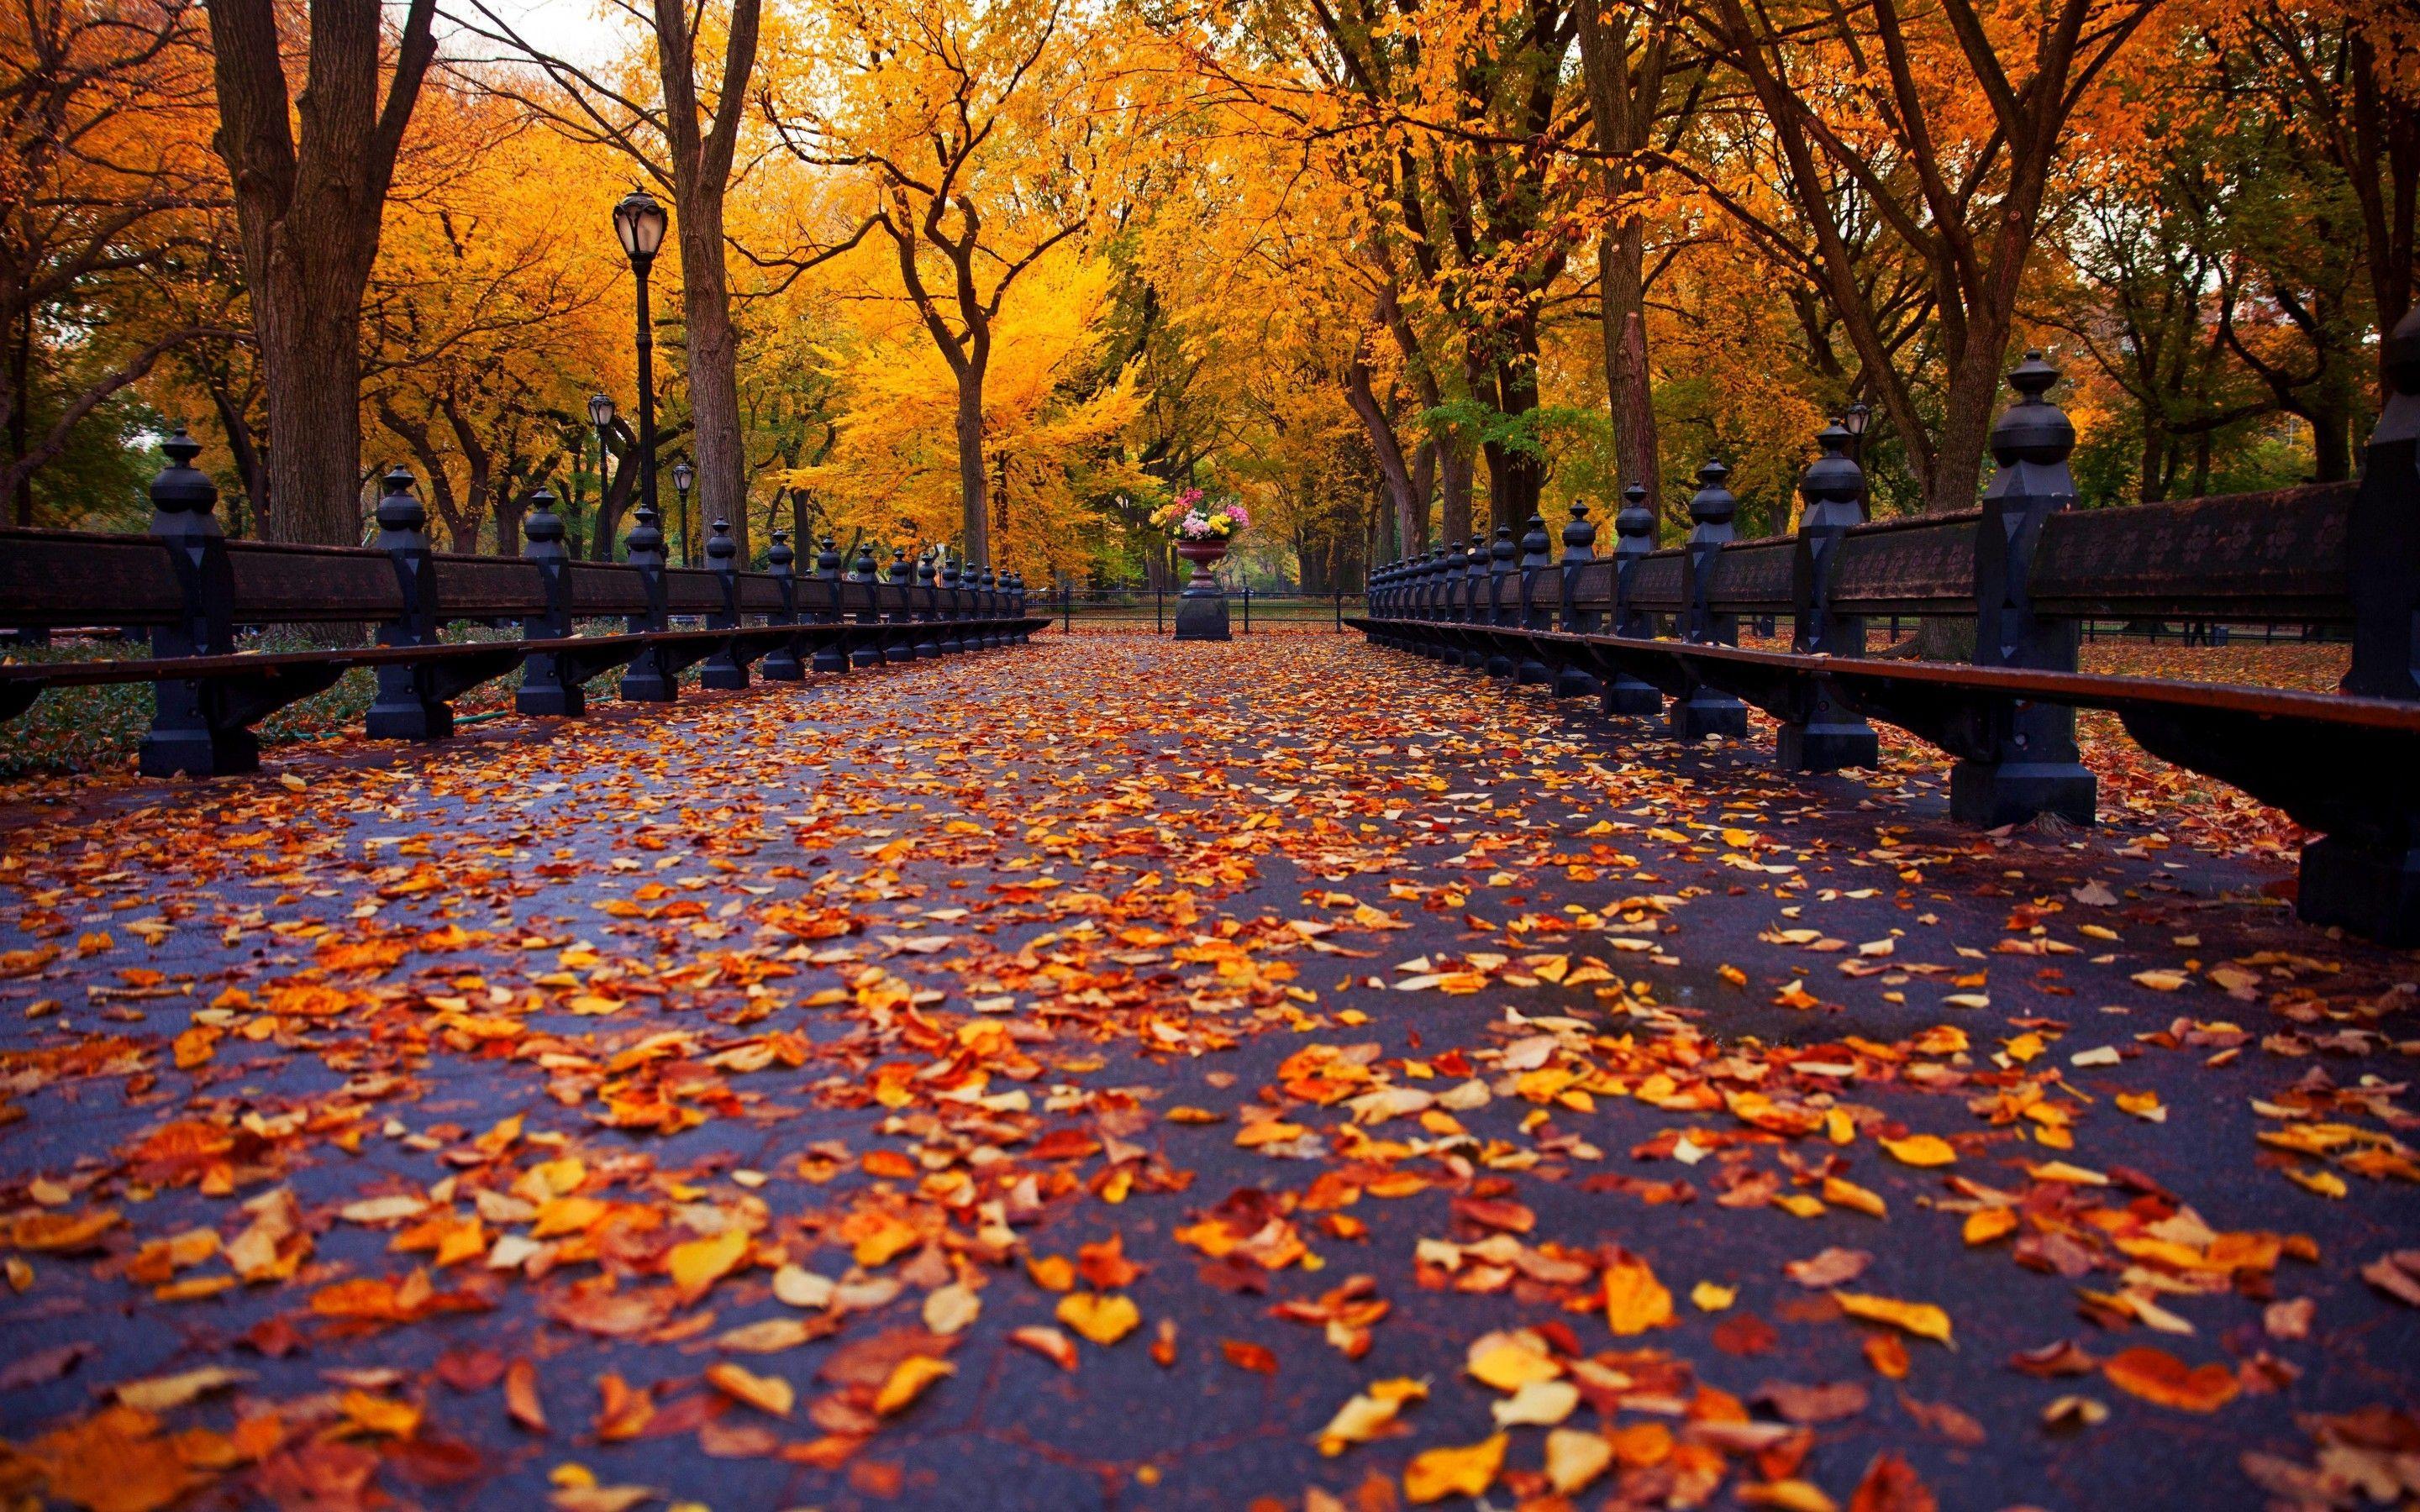 New York City Fall Wallpapers Top Free New York City Fall Backgrounds